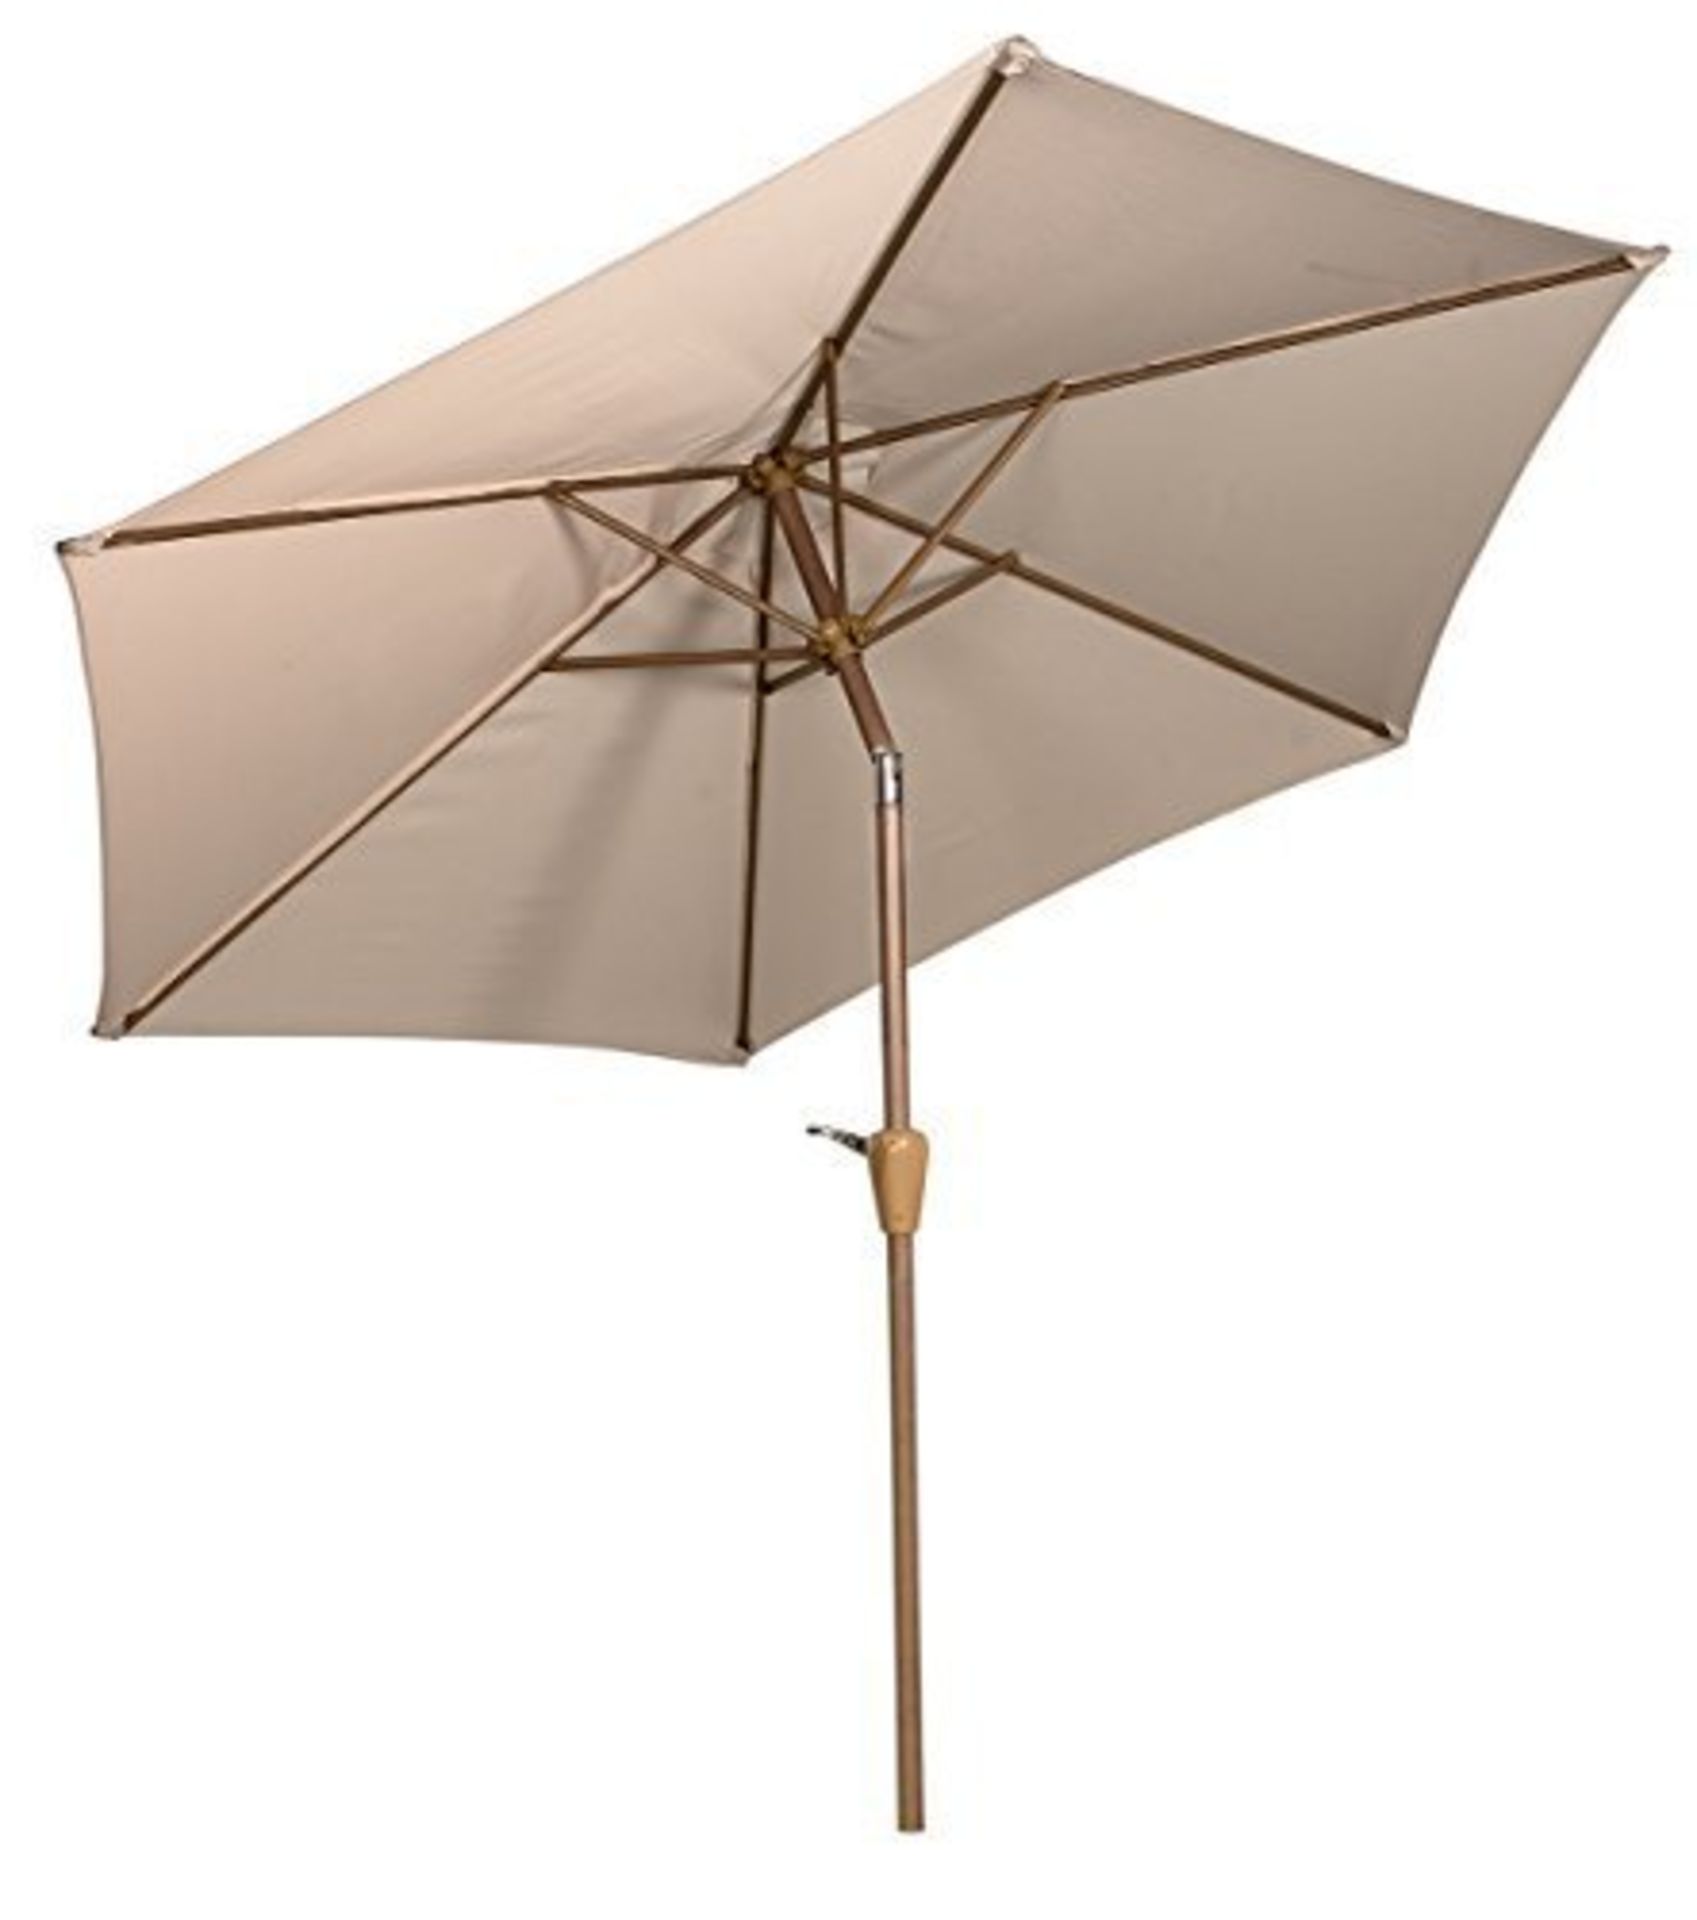 V Brand New Oyster 3.5m Crank Parasol with Wood Effect - Online Price £62.99 (